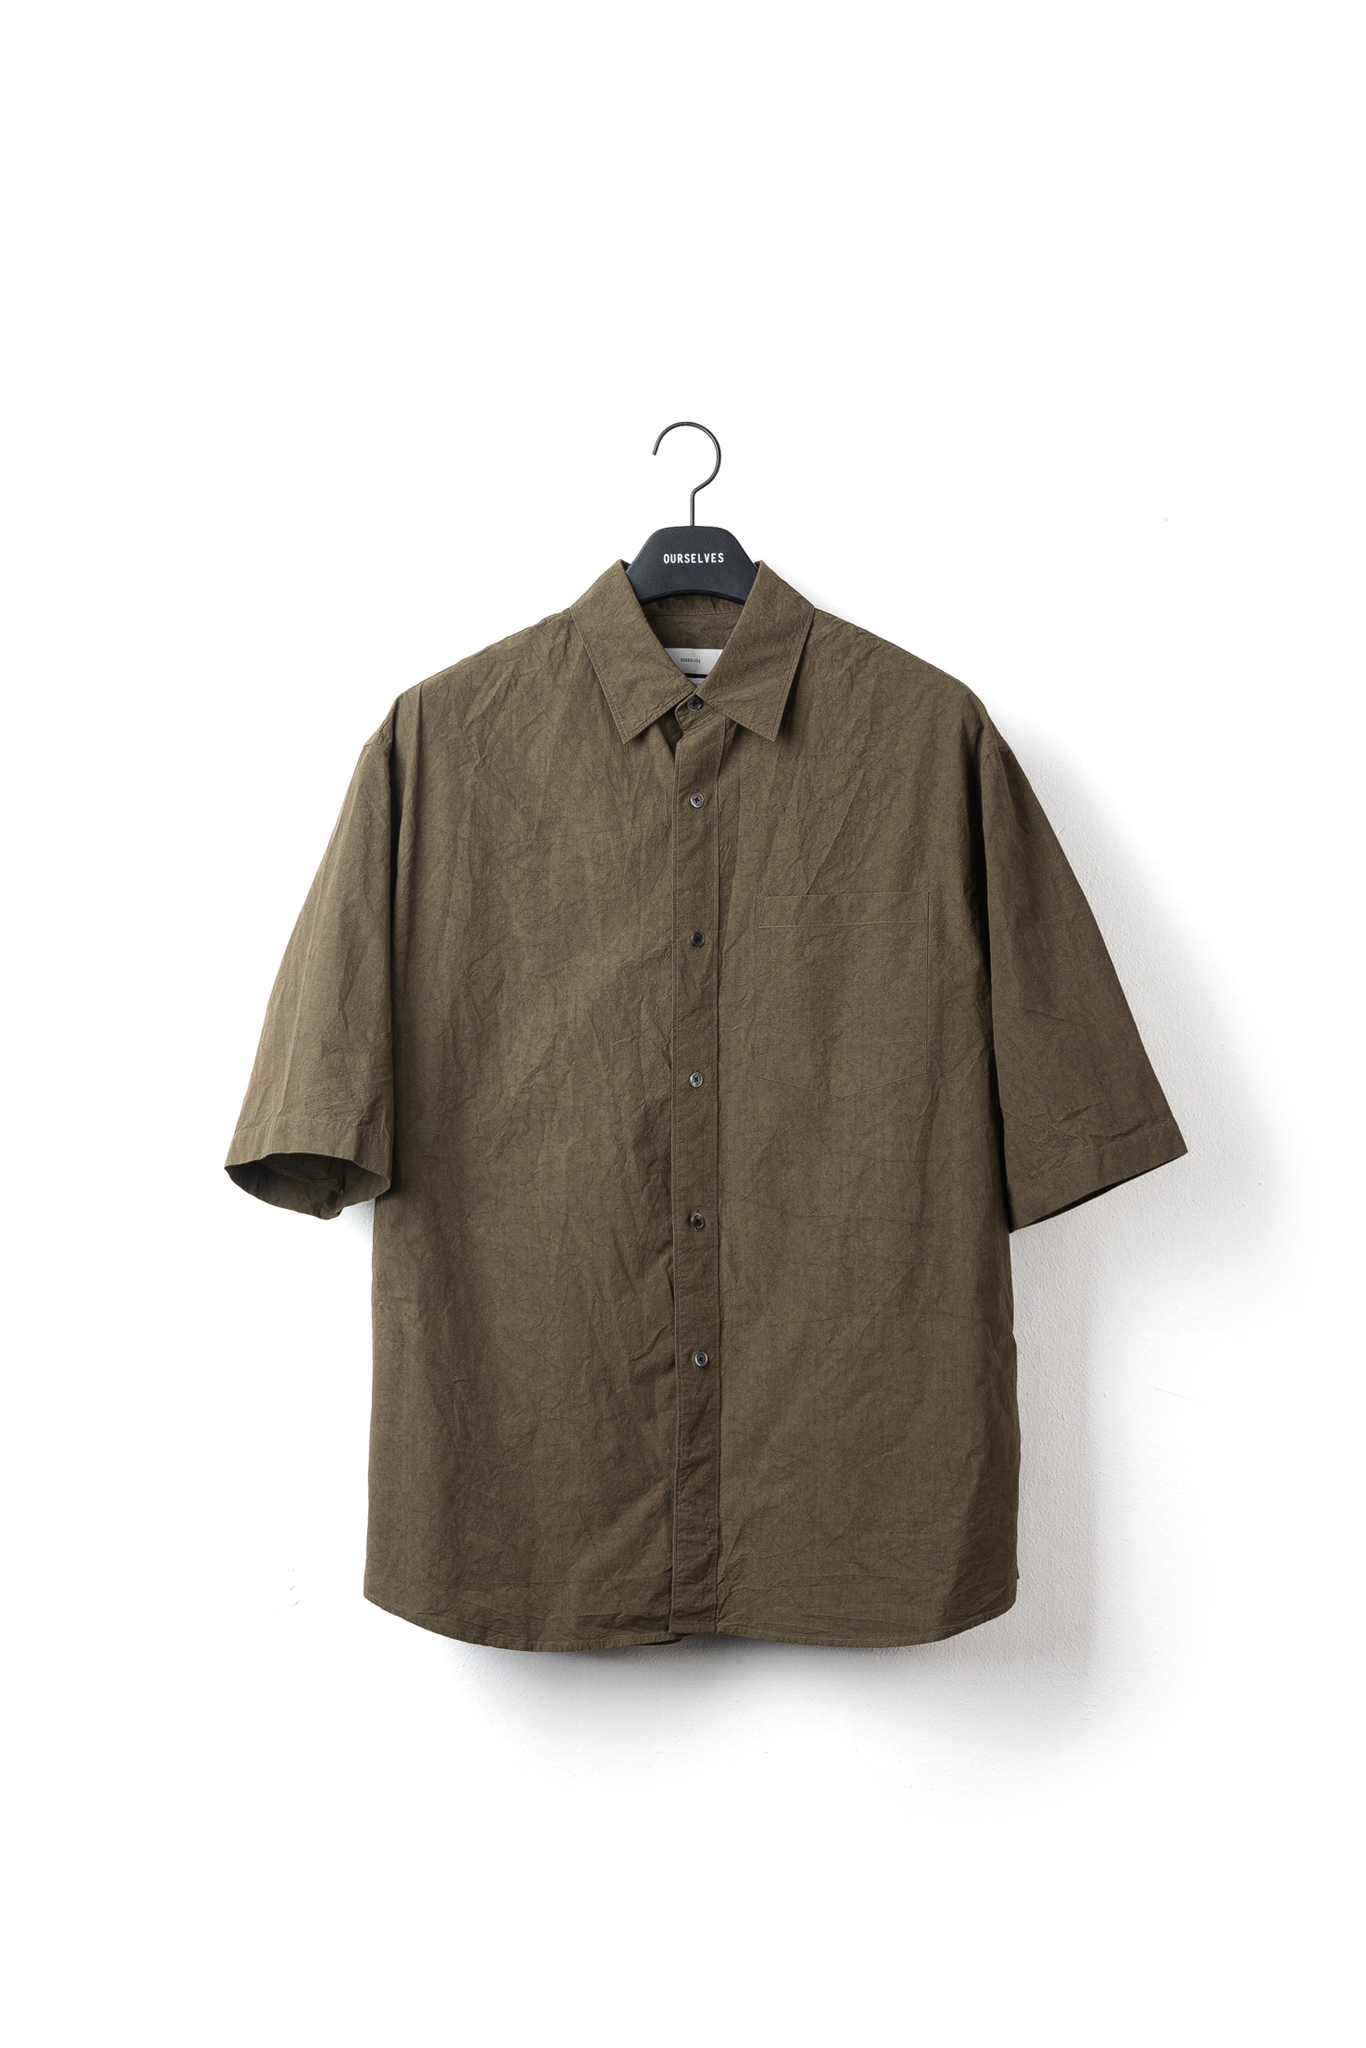 Texture Typewriter Relaxed Half Shirts - Olive